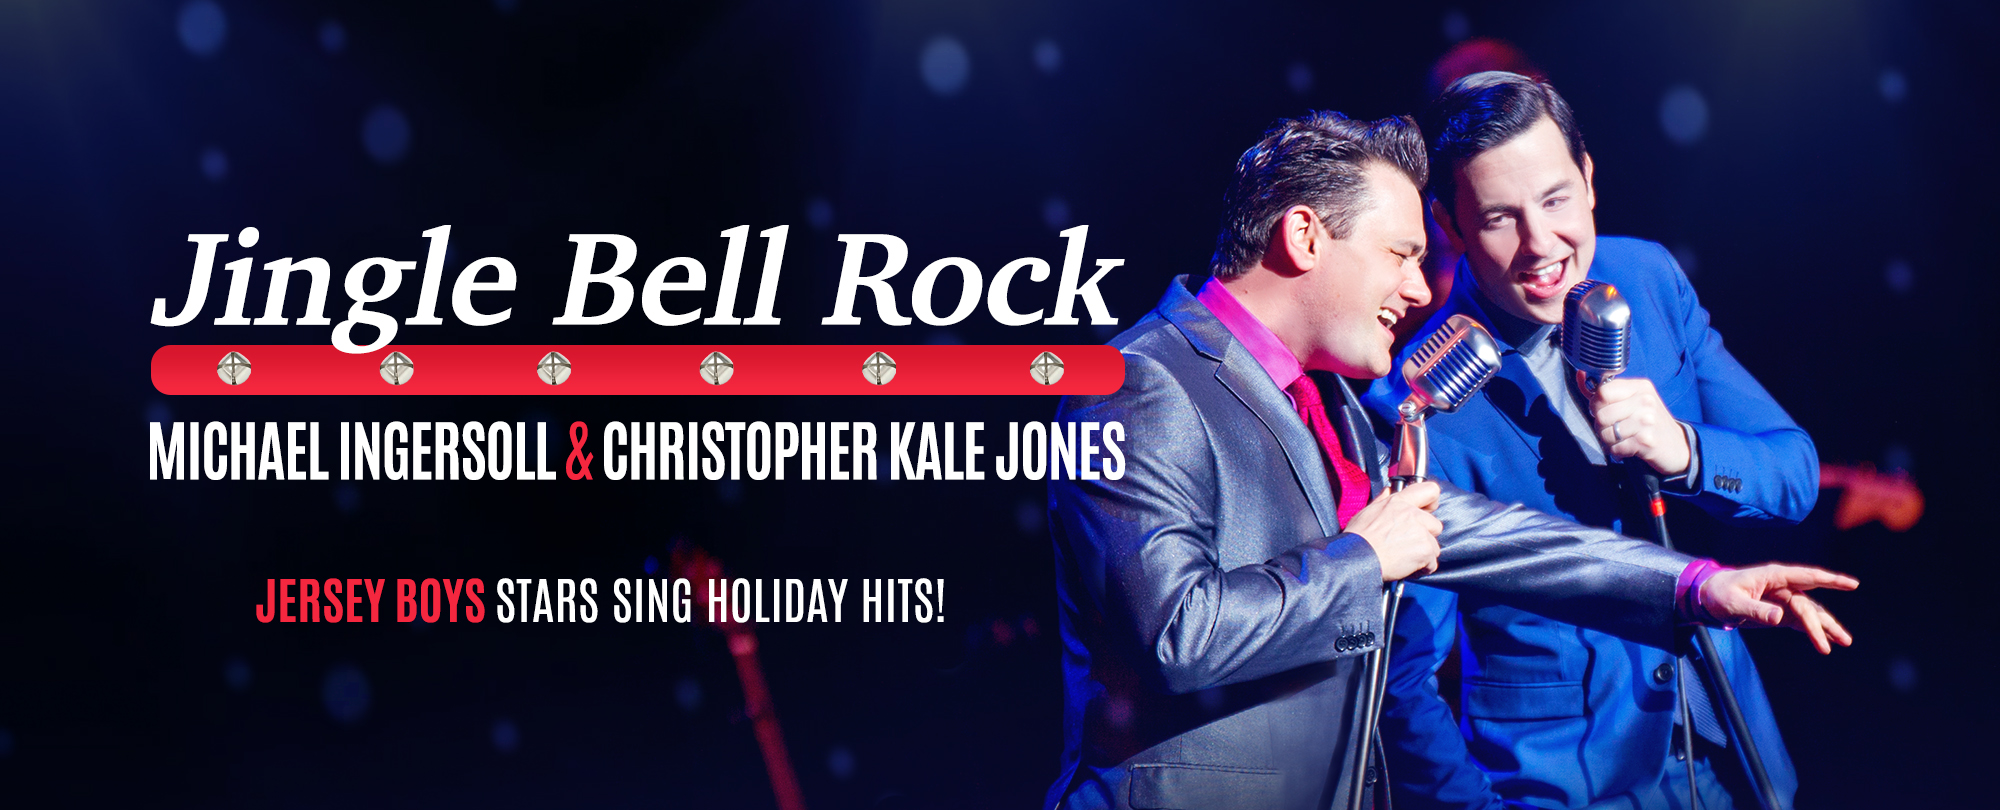 Jingle Bell Rock with Michael Ingersoll and Christopher Kale Jones